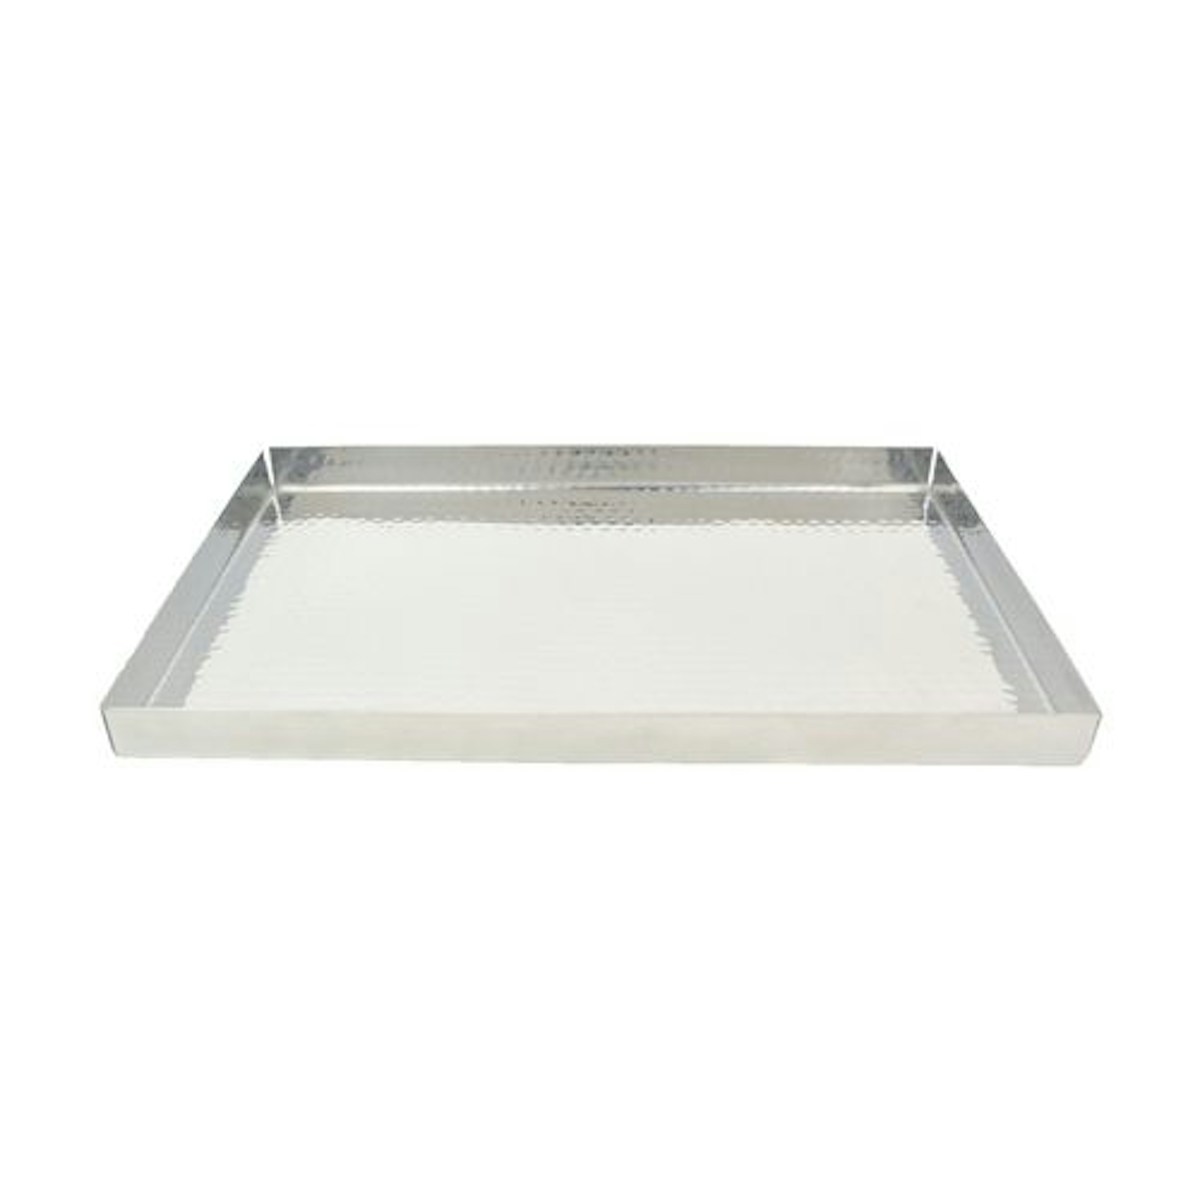 Valencia Vanity Tray - 21 Best Decorative Trays To Buy For Your Tabletop - LuxDeco.com